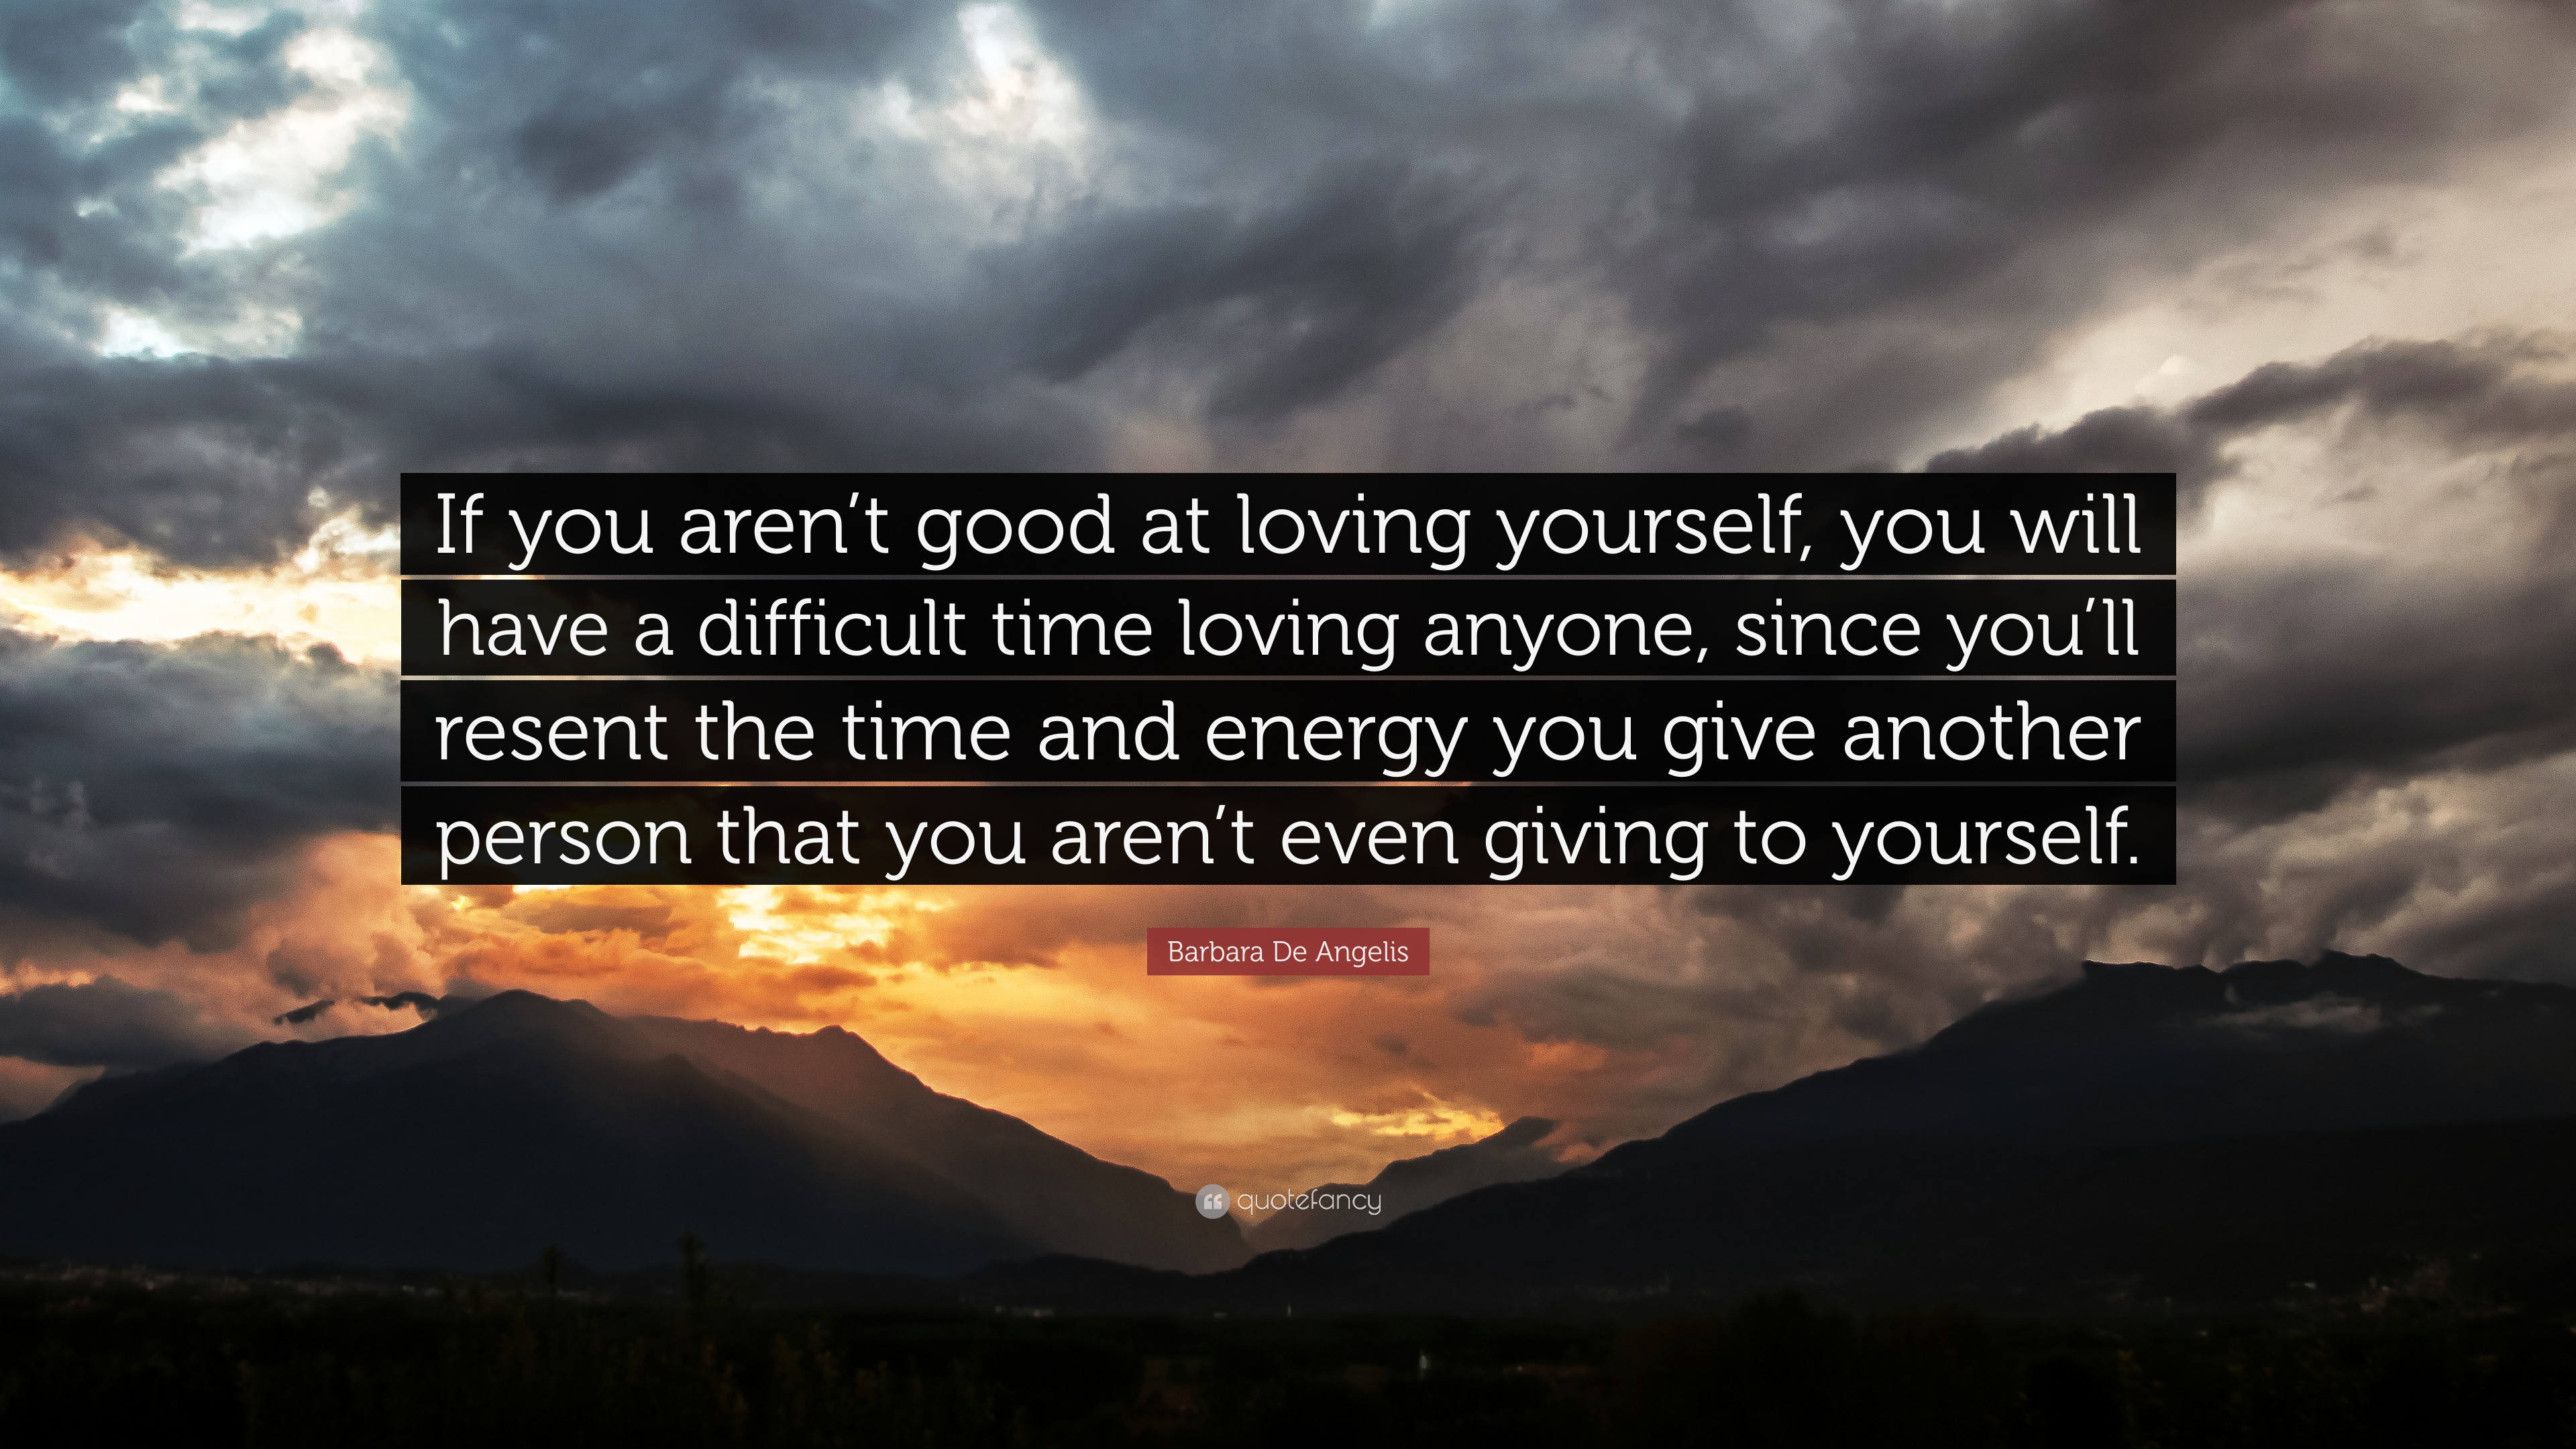 Barbara De Angelis Quote “If you aren t good at loving yourself